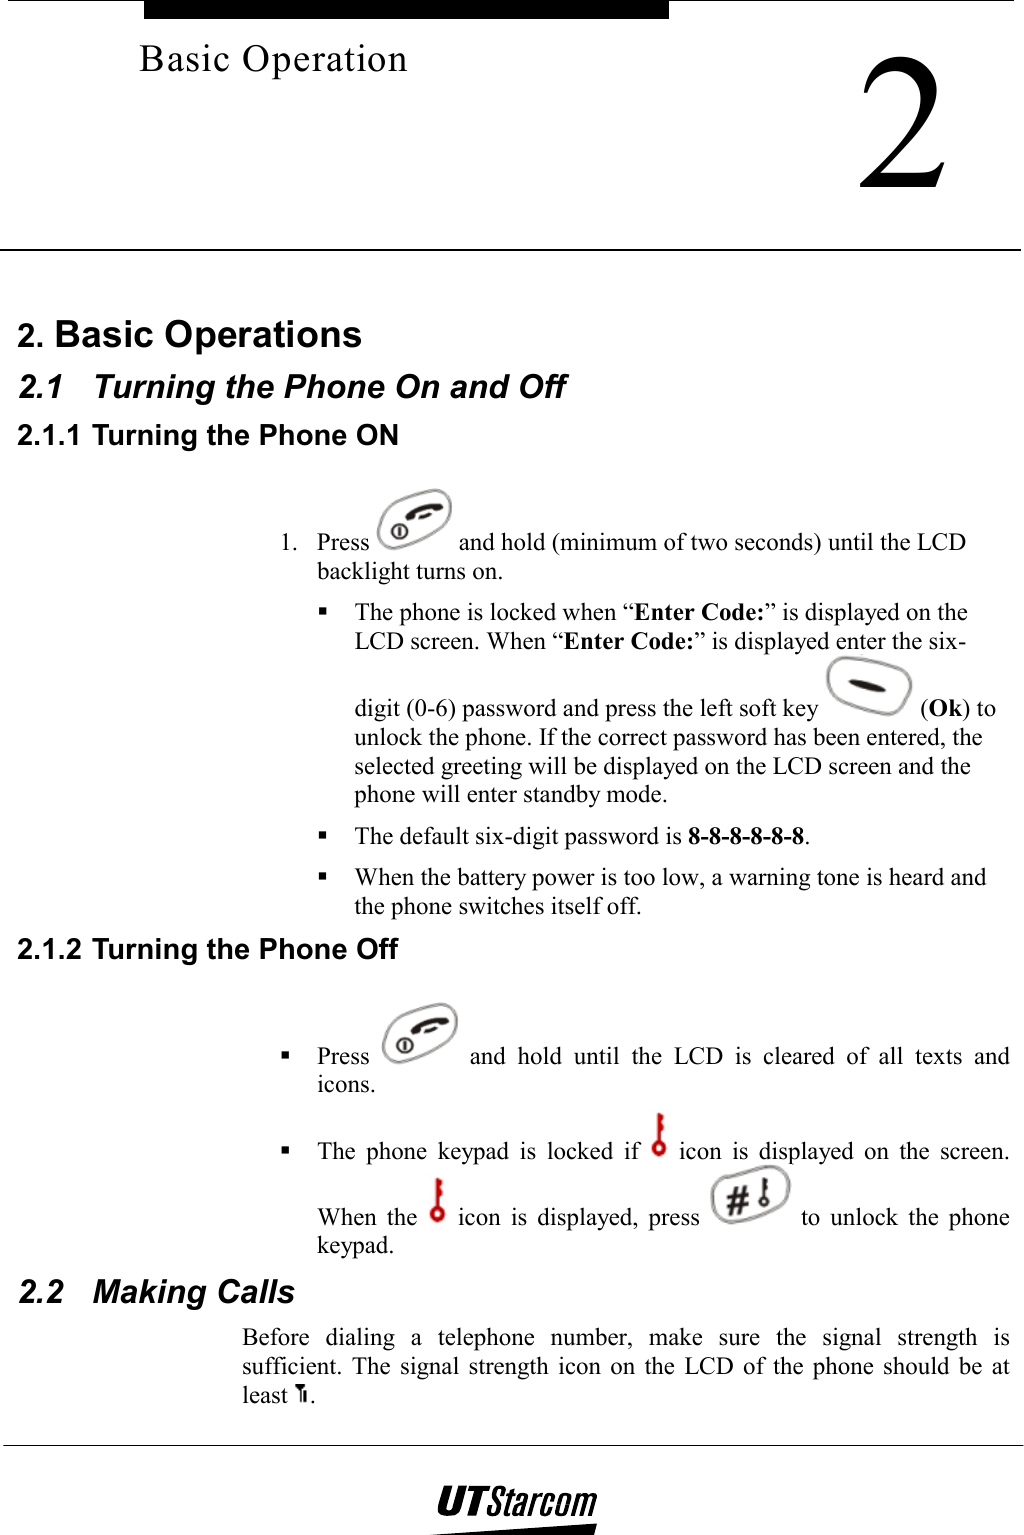     2Basic Operation 2. Basic Operations 2.1  Turning the Phone On and Off 2.1.1 Turning the Phone ON 1. Press   and hold (minimum of two seconds) until the LCD backlight turns on.  The phone is locked when “Enter Code:” is displayed on the LCD screen. When “Enter Code:” is displayed enter the six-digit (0-6) password and press the left soft key   (Ok) to unlock the phone. If the correct password has been entered, the selected greeting will be displayed on the LCD screen and the phone will enter standby mode.  The default six-digit password is 8-8-8-8-8-8.  When the battery power is too low, a warning tone is heard and the phone switches itself off. 2.1.2 Turning the Phone Off  Press   and hold until the LCD is cleared of all texts and icons.  The phone keypad is locked if   icon is displayed on the screen. When the   icon is displayed, press   to unlock the phone keypad. 2.2 Making Calls Before dialing a telephone number, make sure the signal strength is sufficient. The signal strength icon on the LCD of the phone should be at least  . 